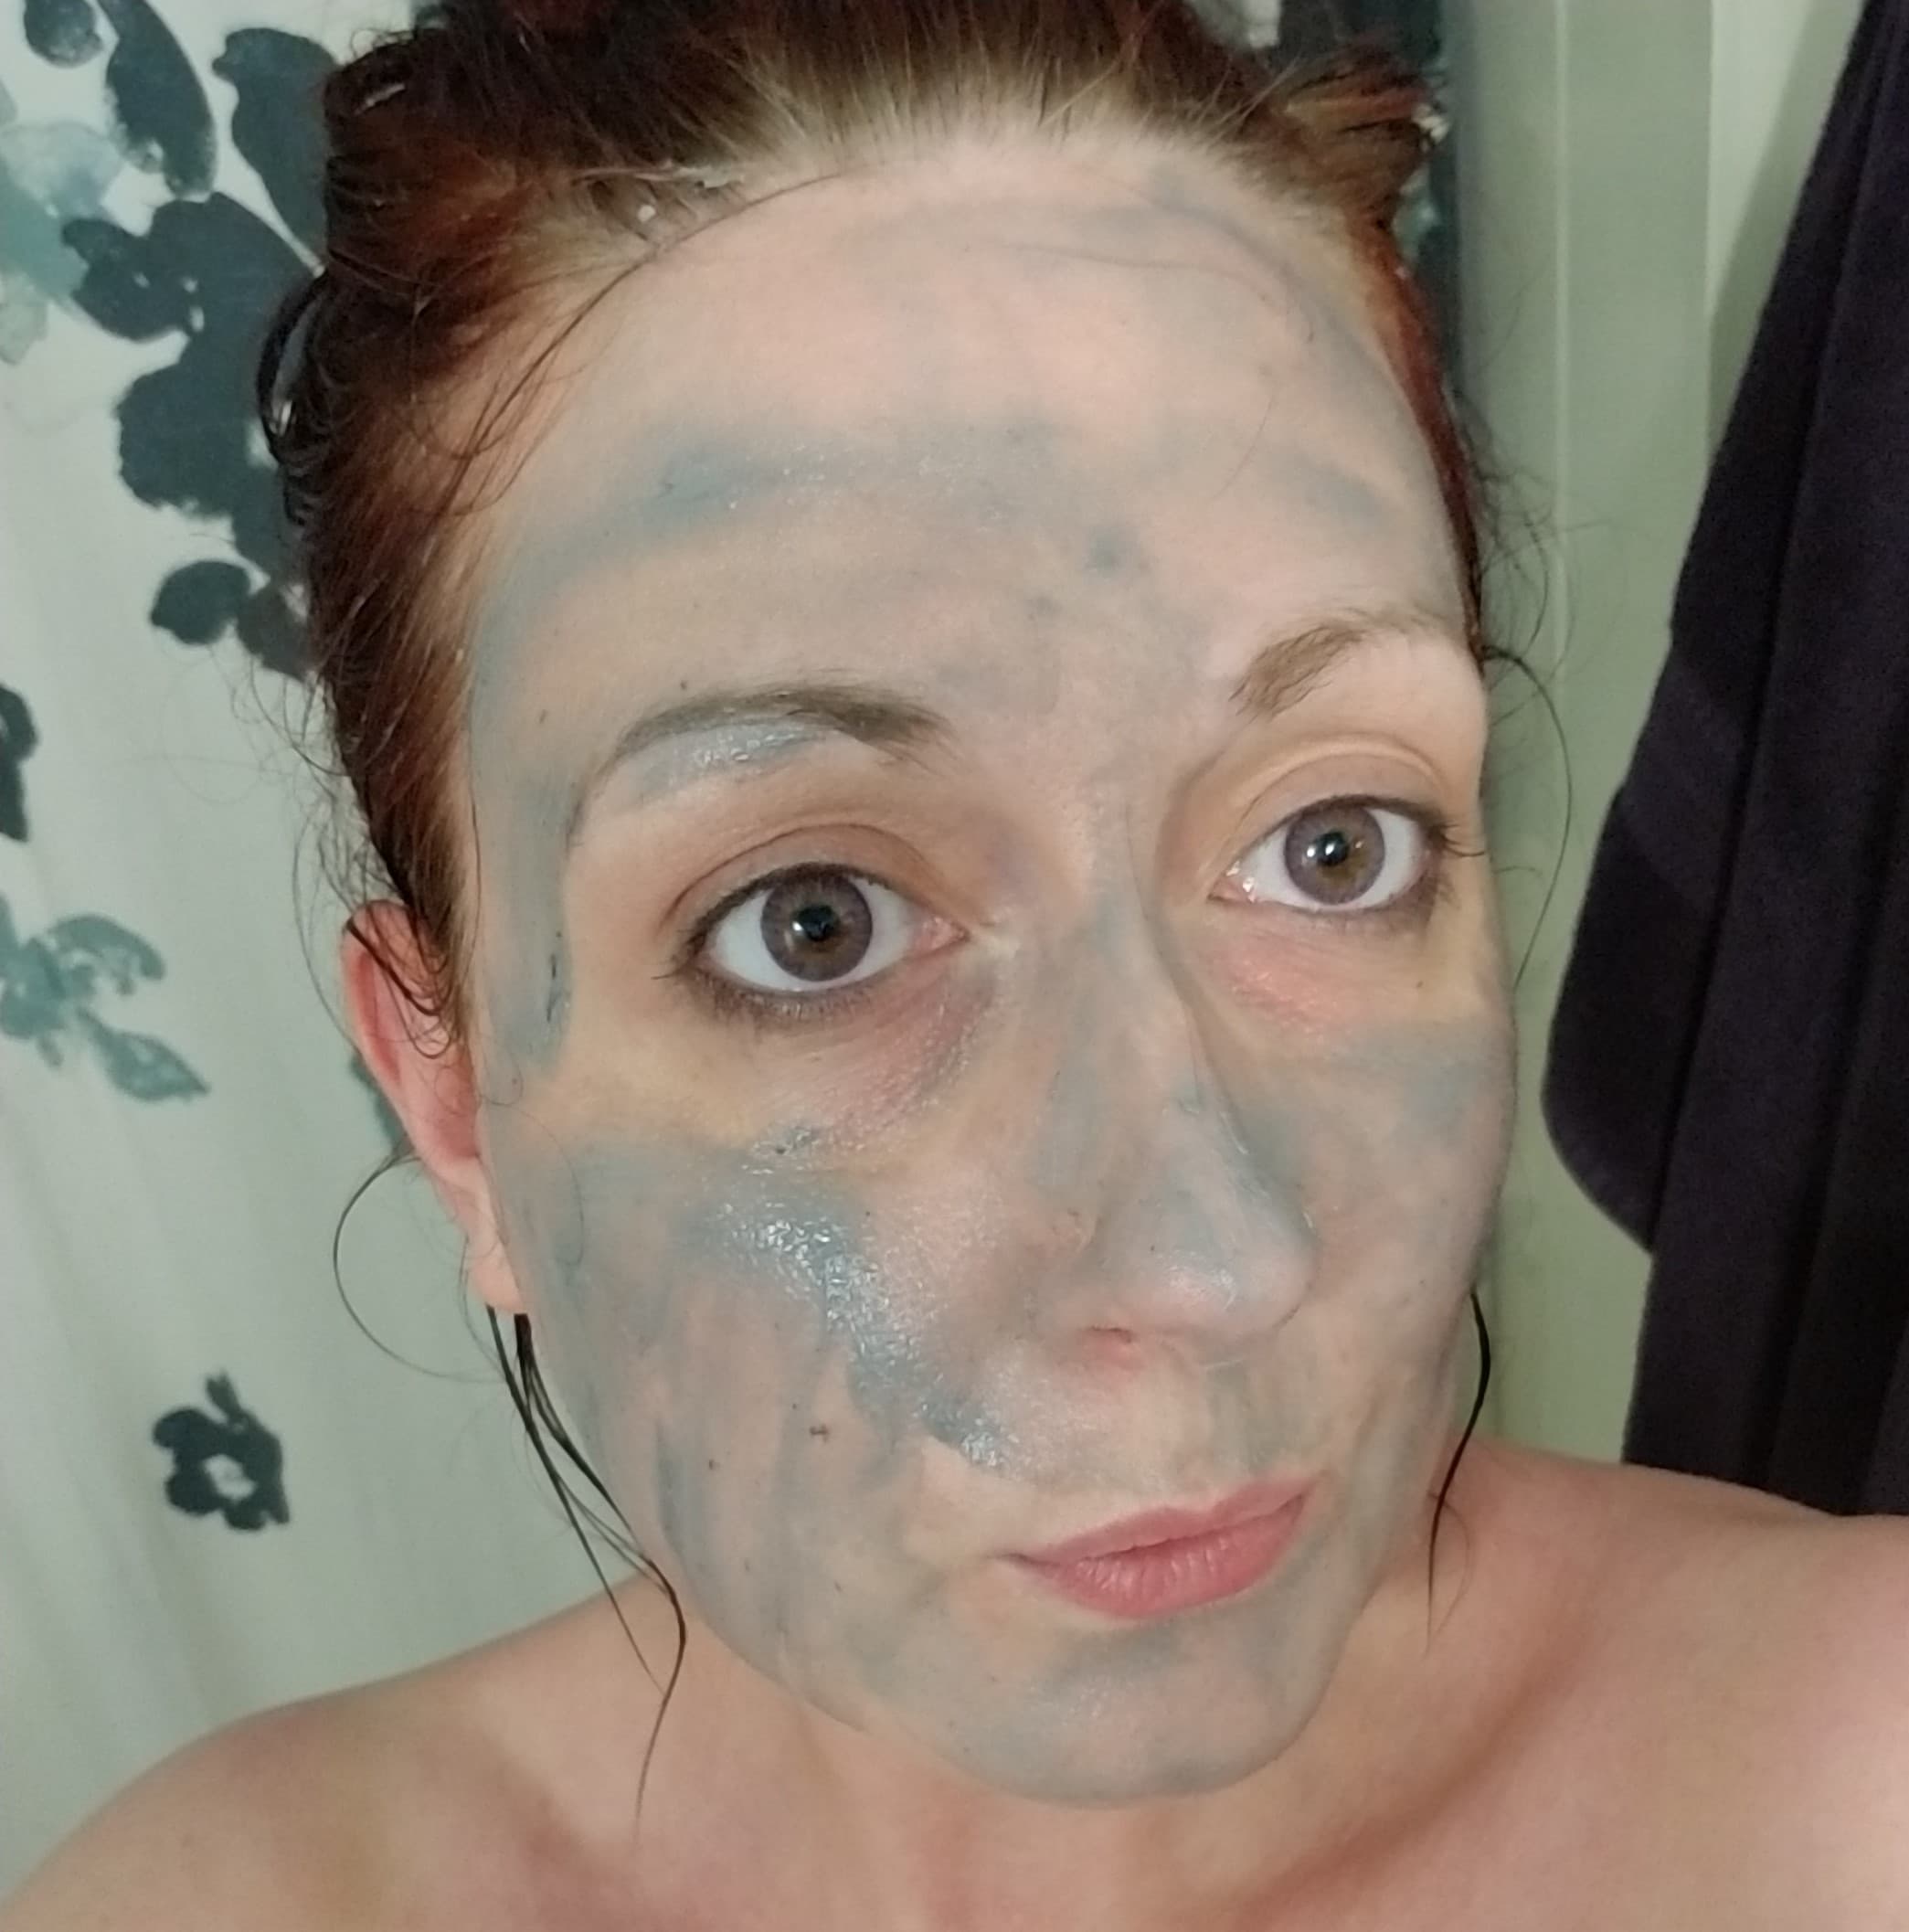 New Toning Mask with amazing results!